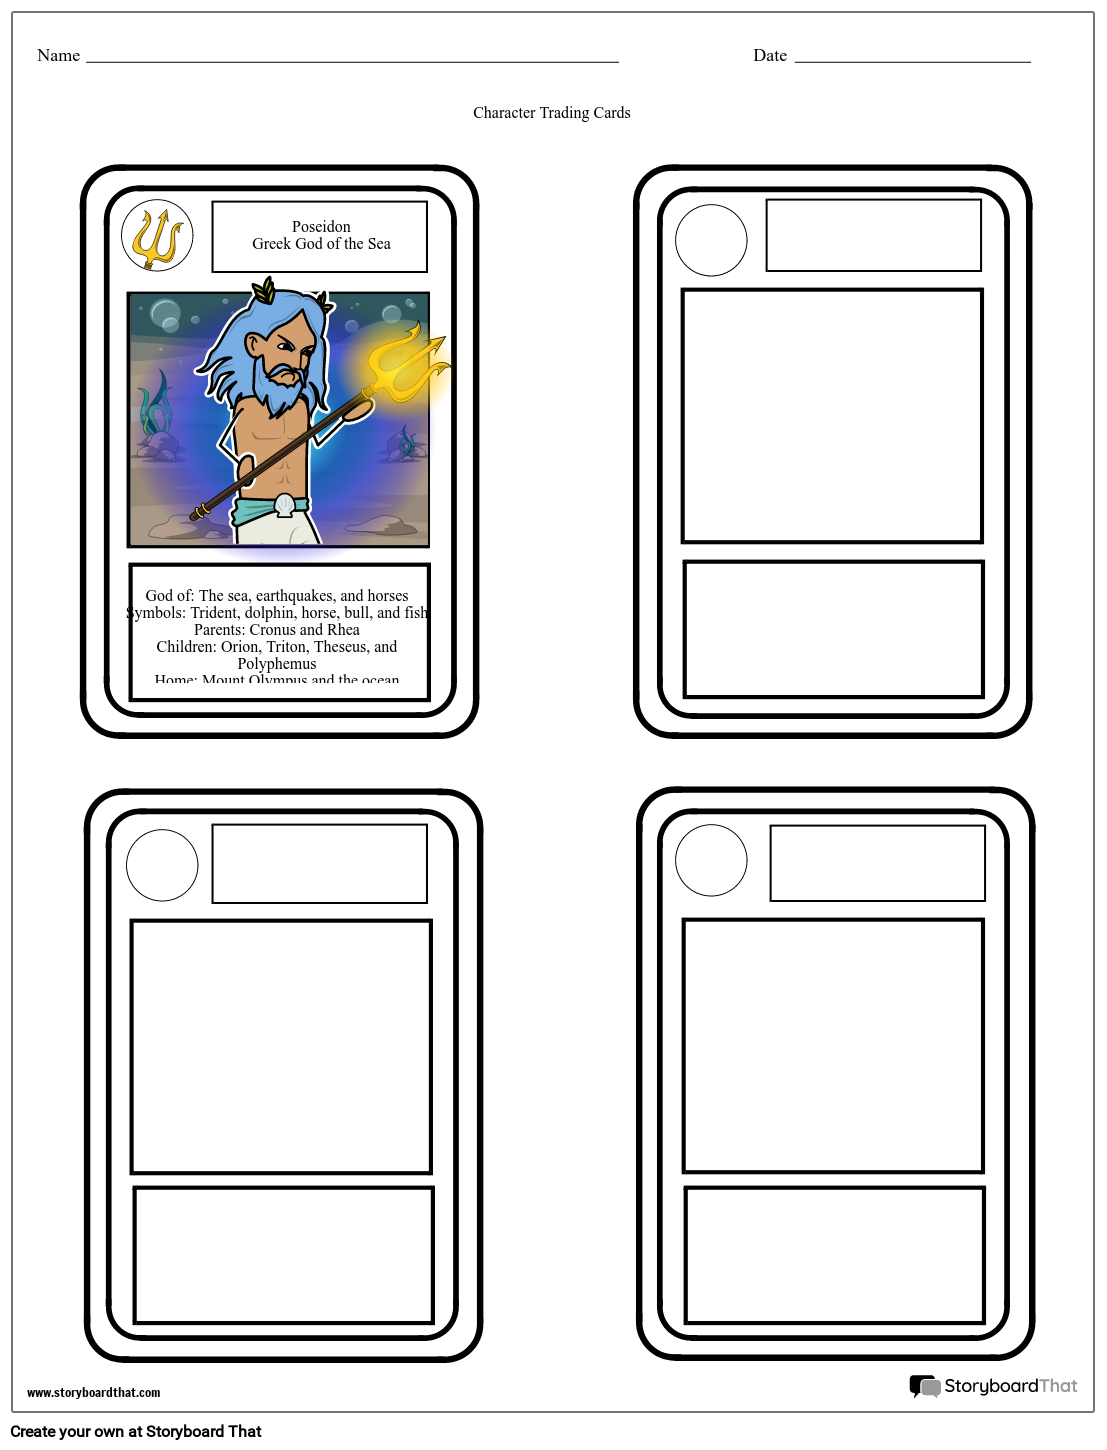 Simple Trading Cards Character Map Worksheet Template